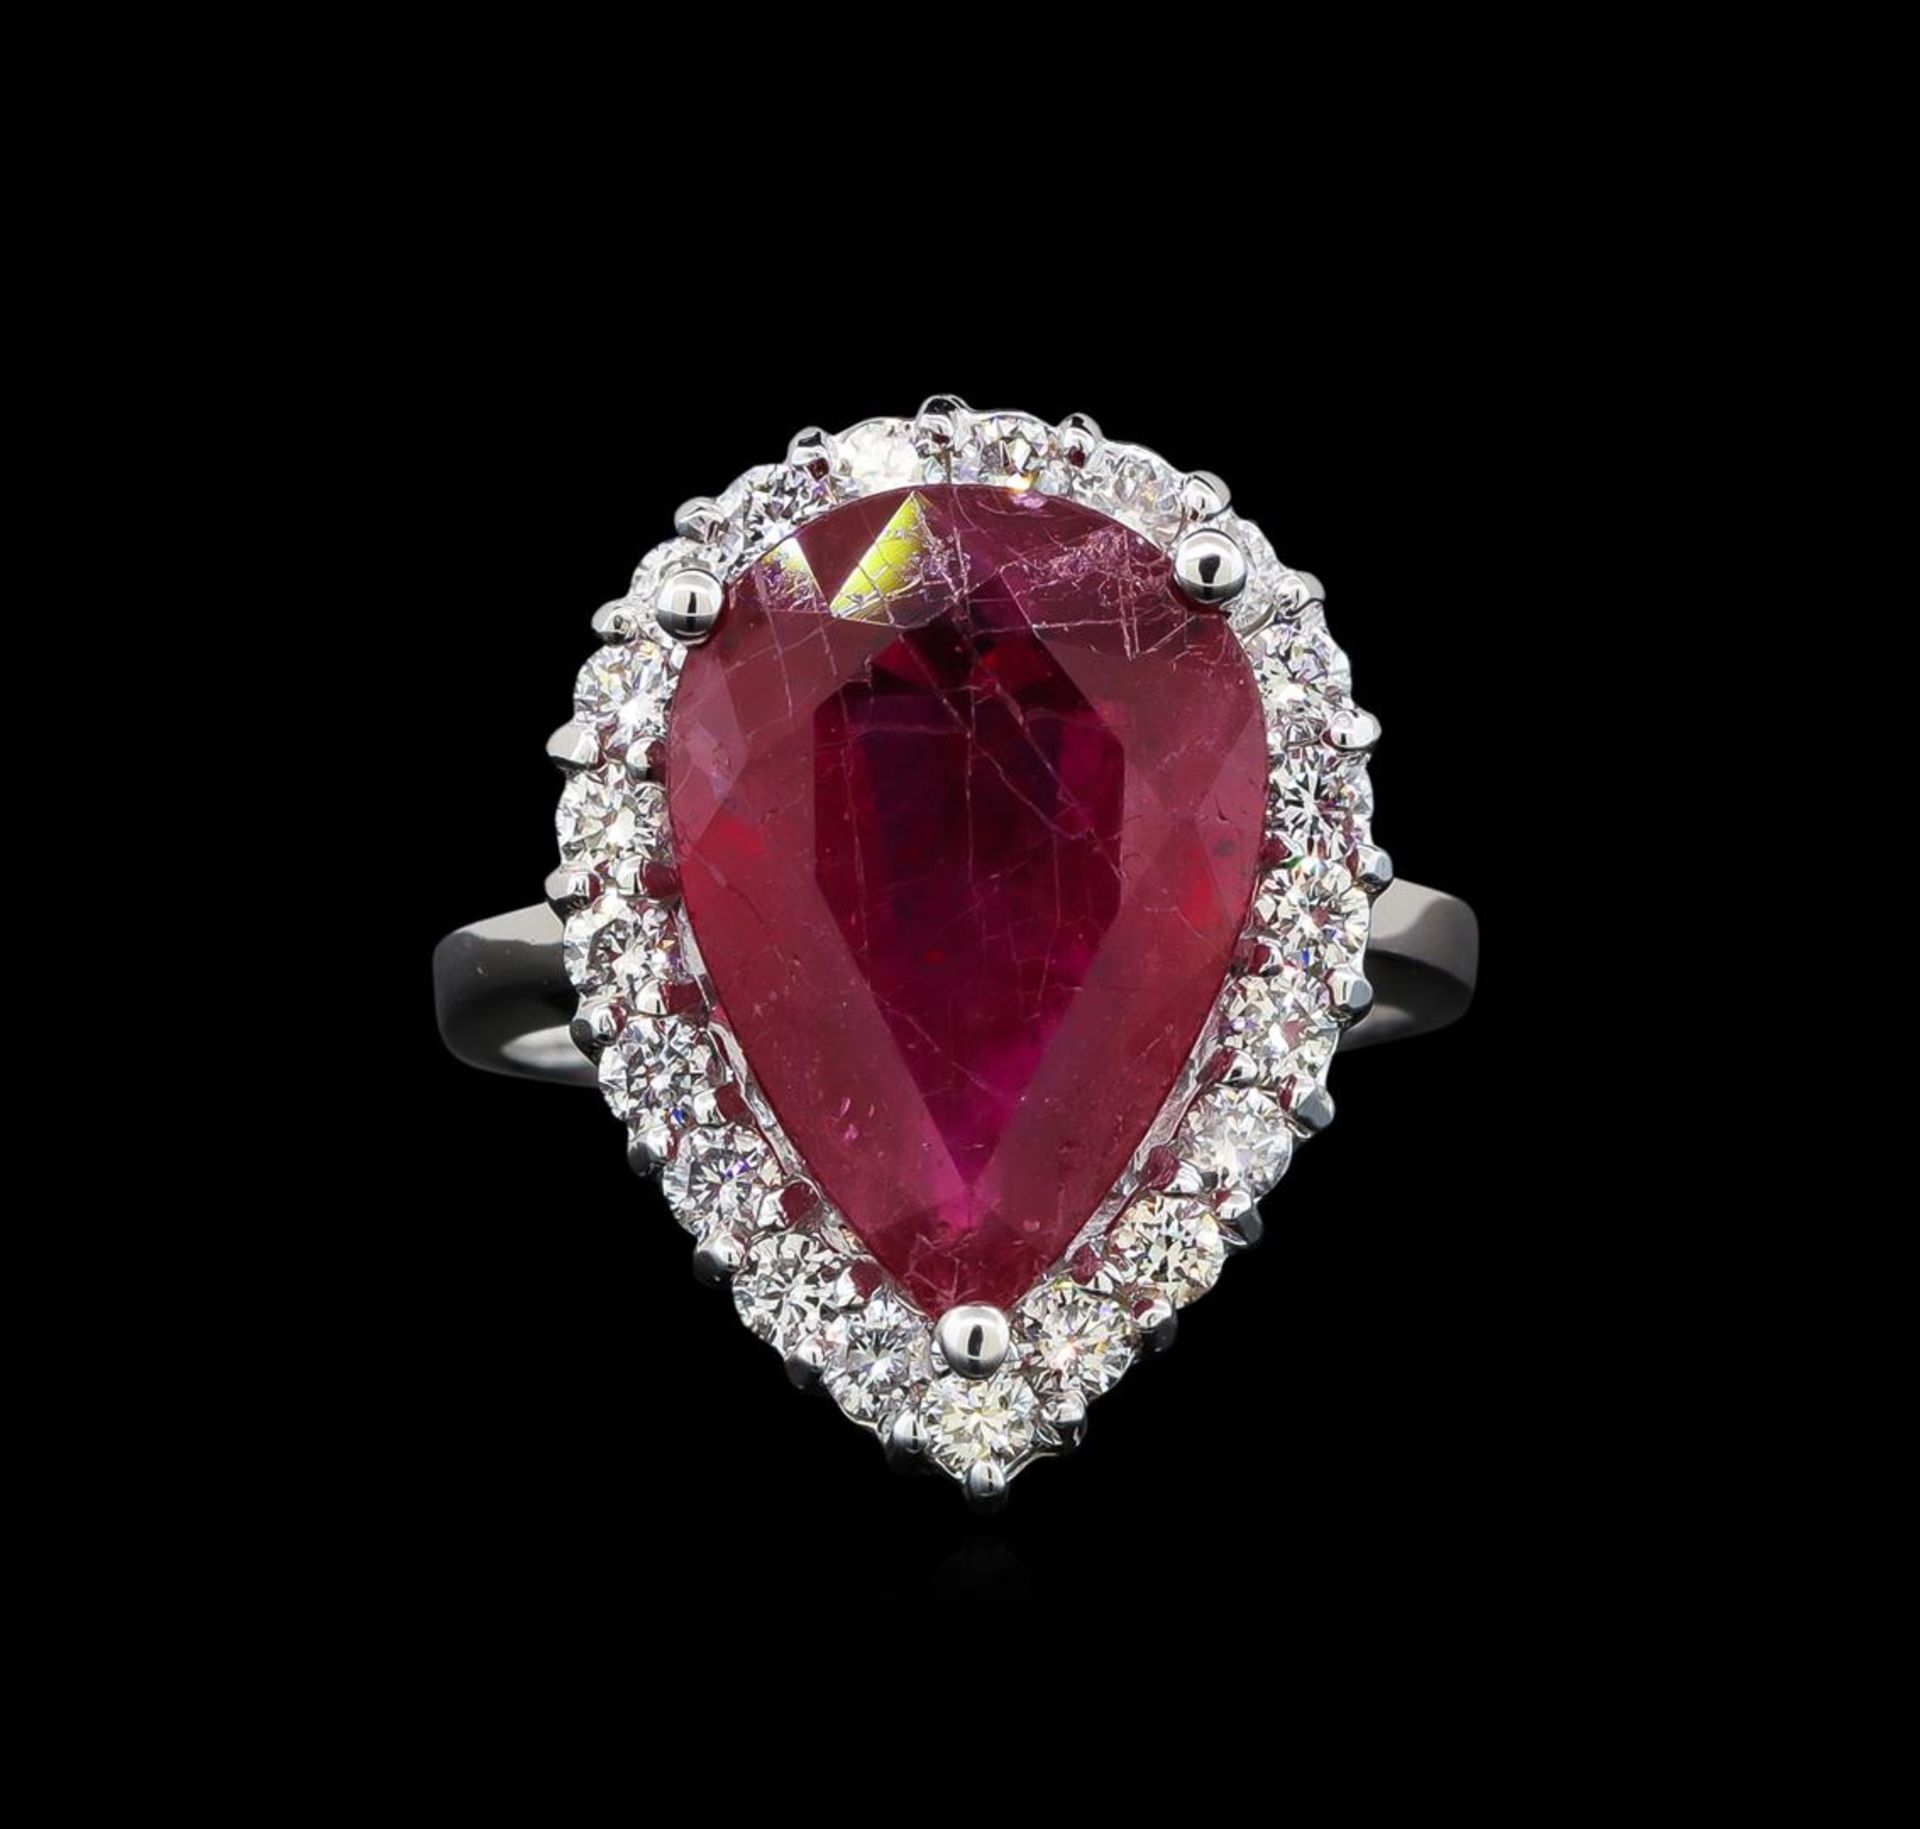 14KT White Gold 5.88ct Ruby and Diamond Ring - Image 2 of 5